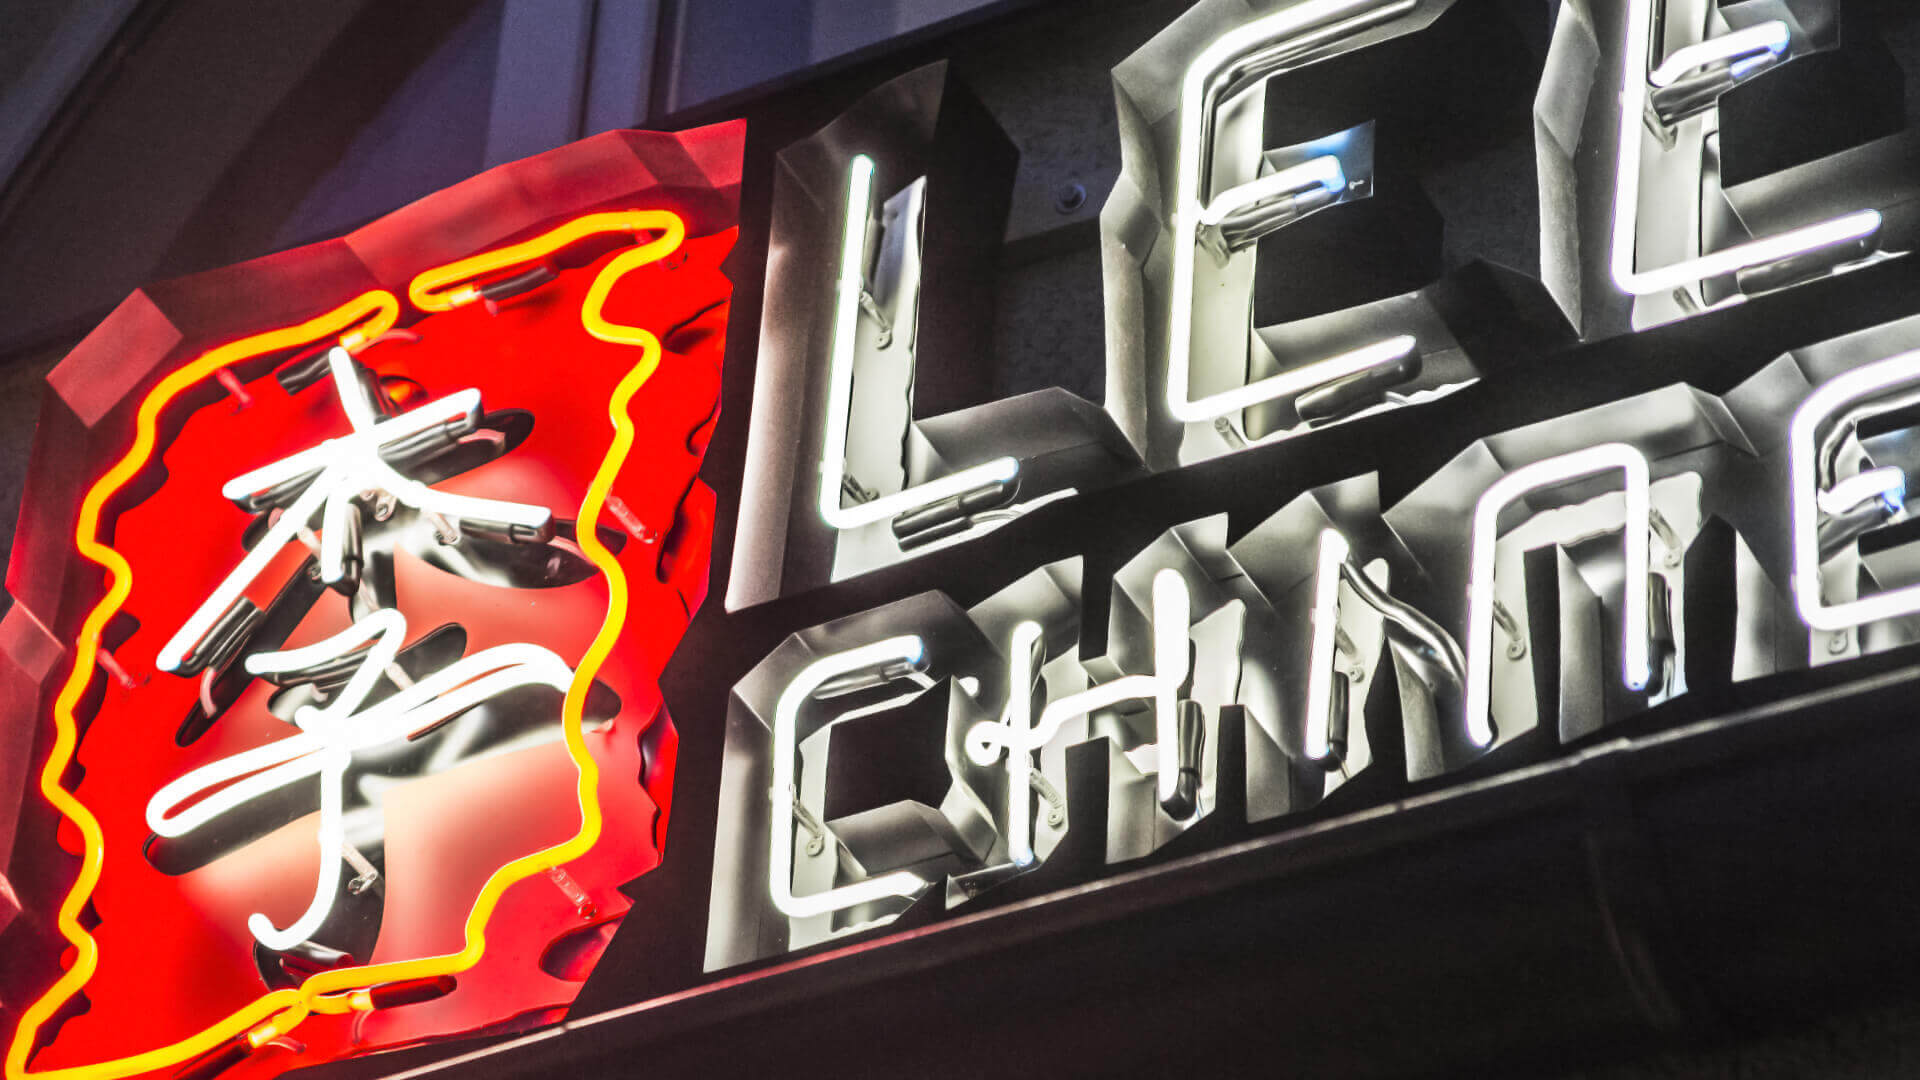 Lees Chines - neon-lees-chinese-neon-above-entry-to-the-restaurant-neon-on-the-wall-neon-on-the-outside-neon-in-melate-rusting-logo-signature-chinese-letter-signs-neon-lites-illuminated-china-restuarant-gdansk